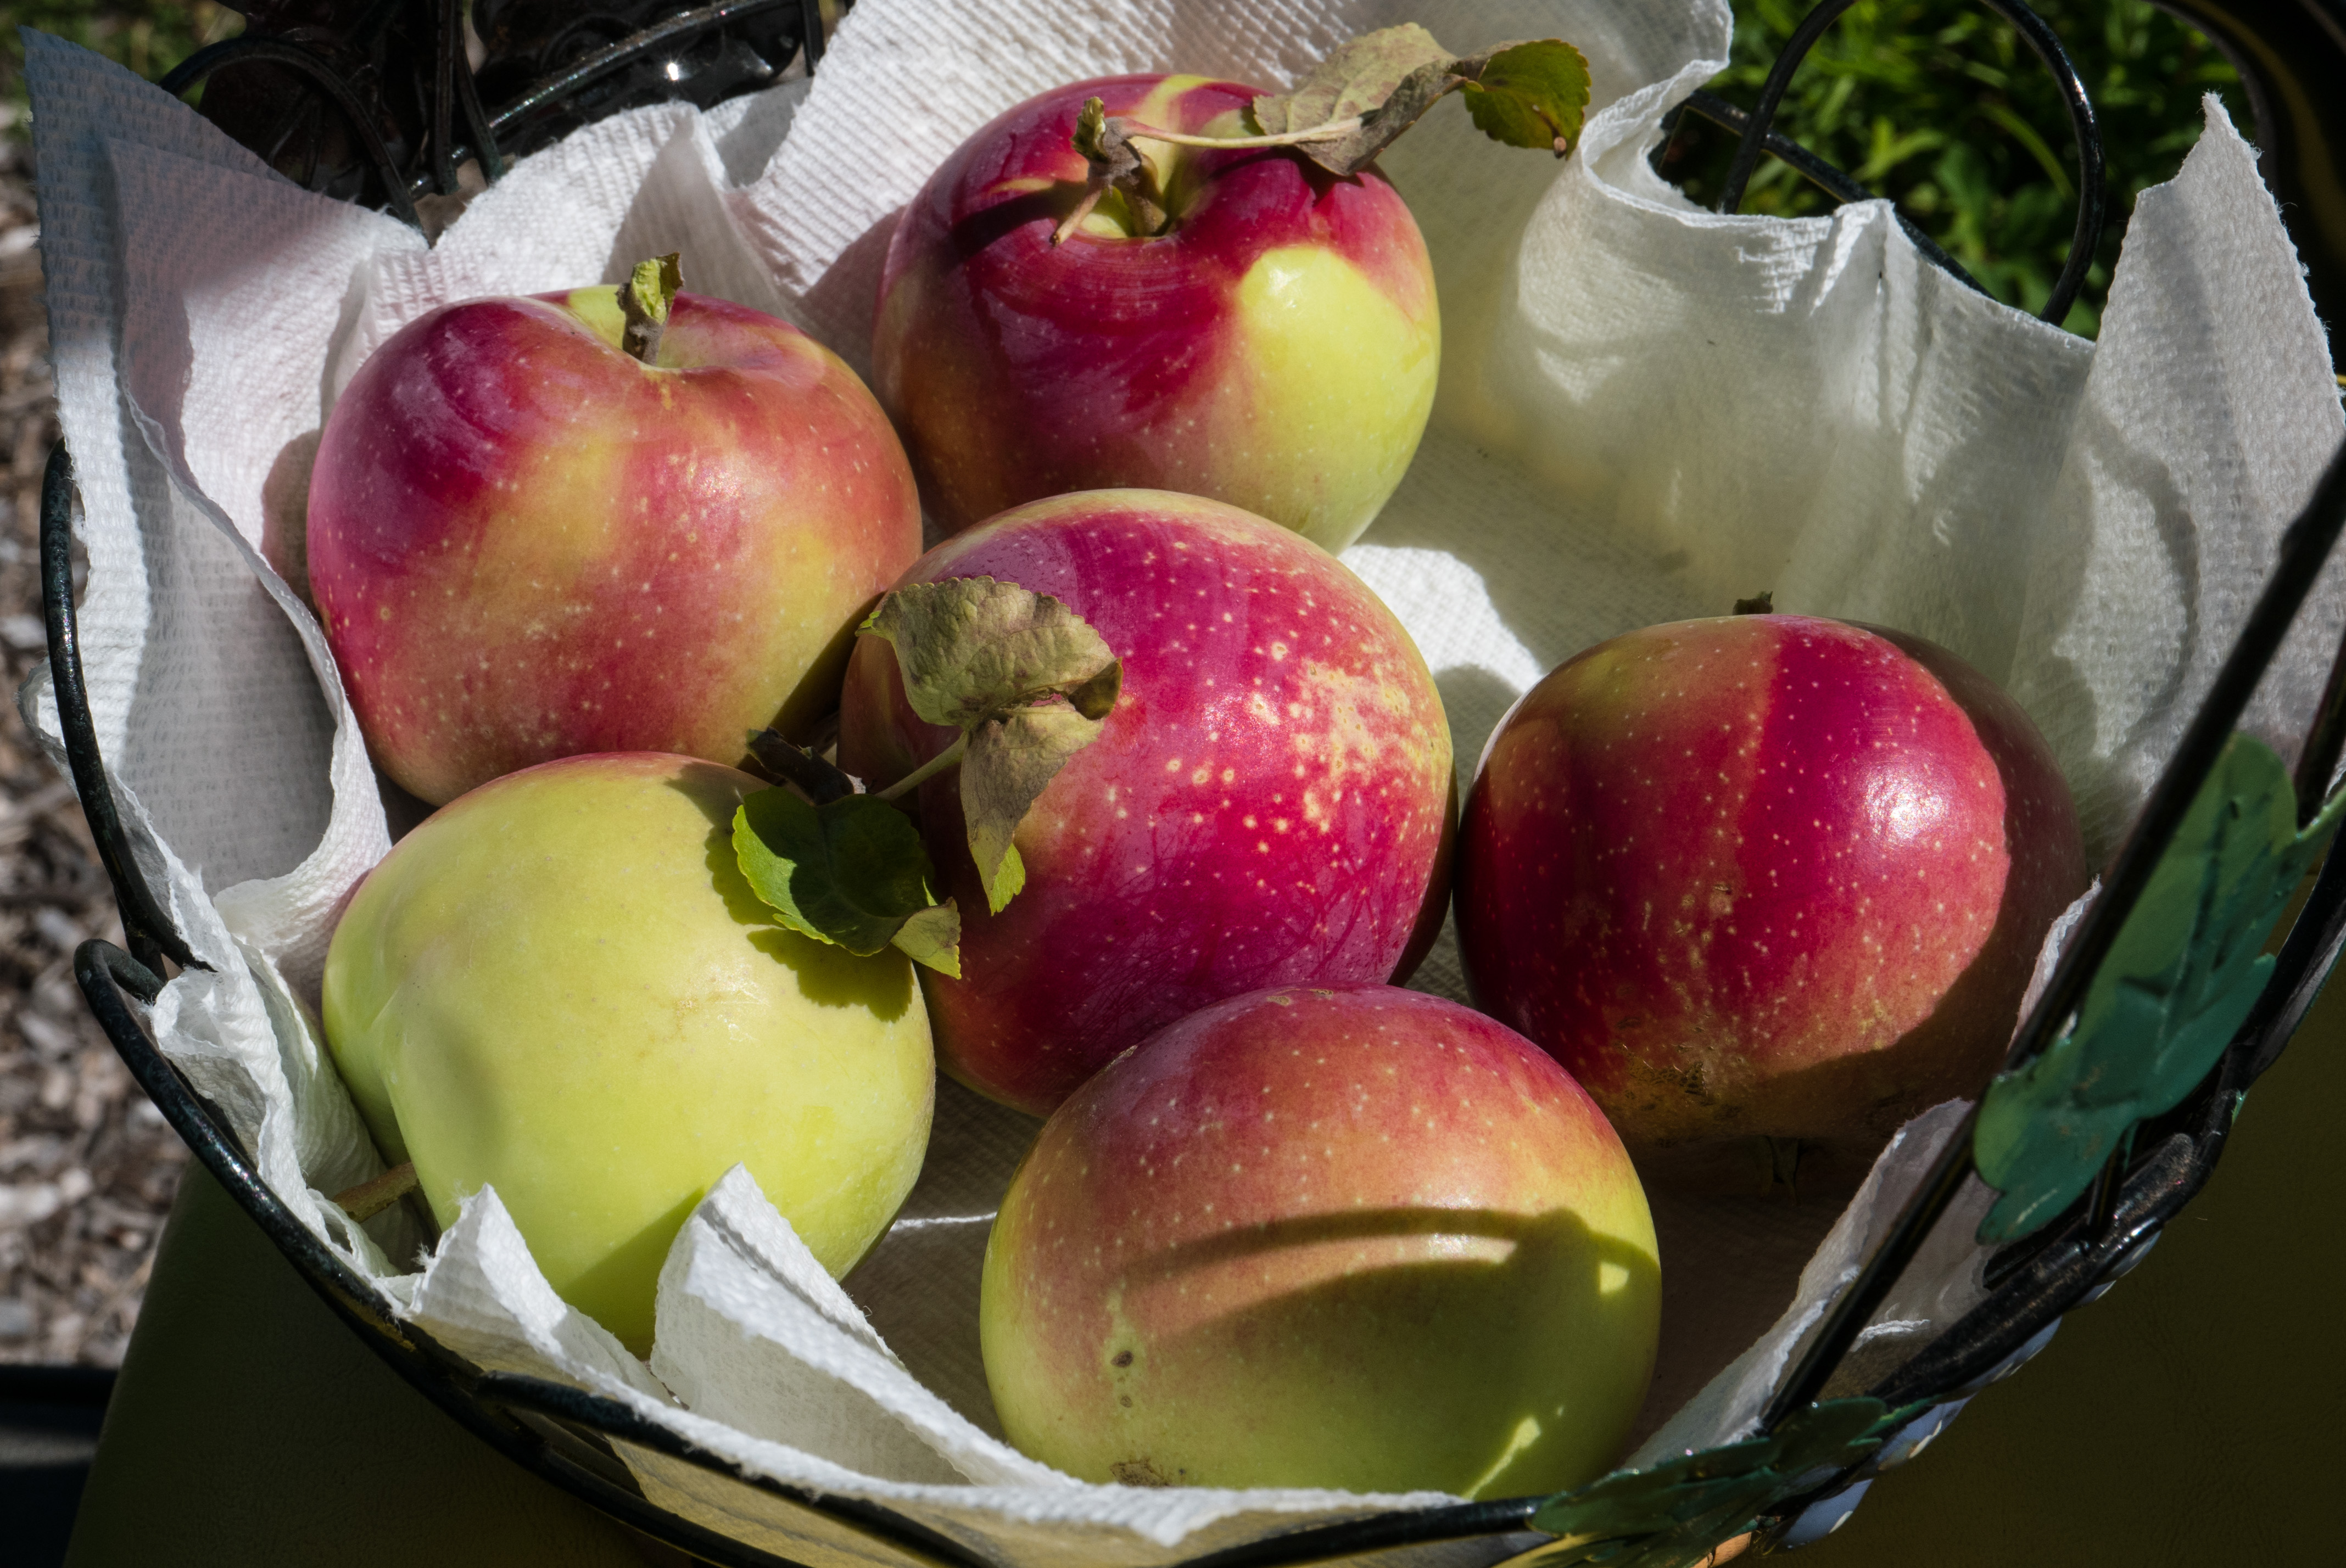 In late summer, children and grandchildren gathered apples from the many old apple trees at Glen Villa.